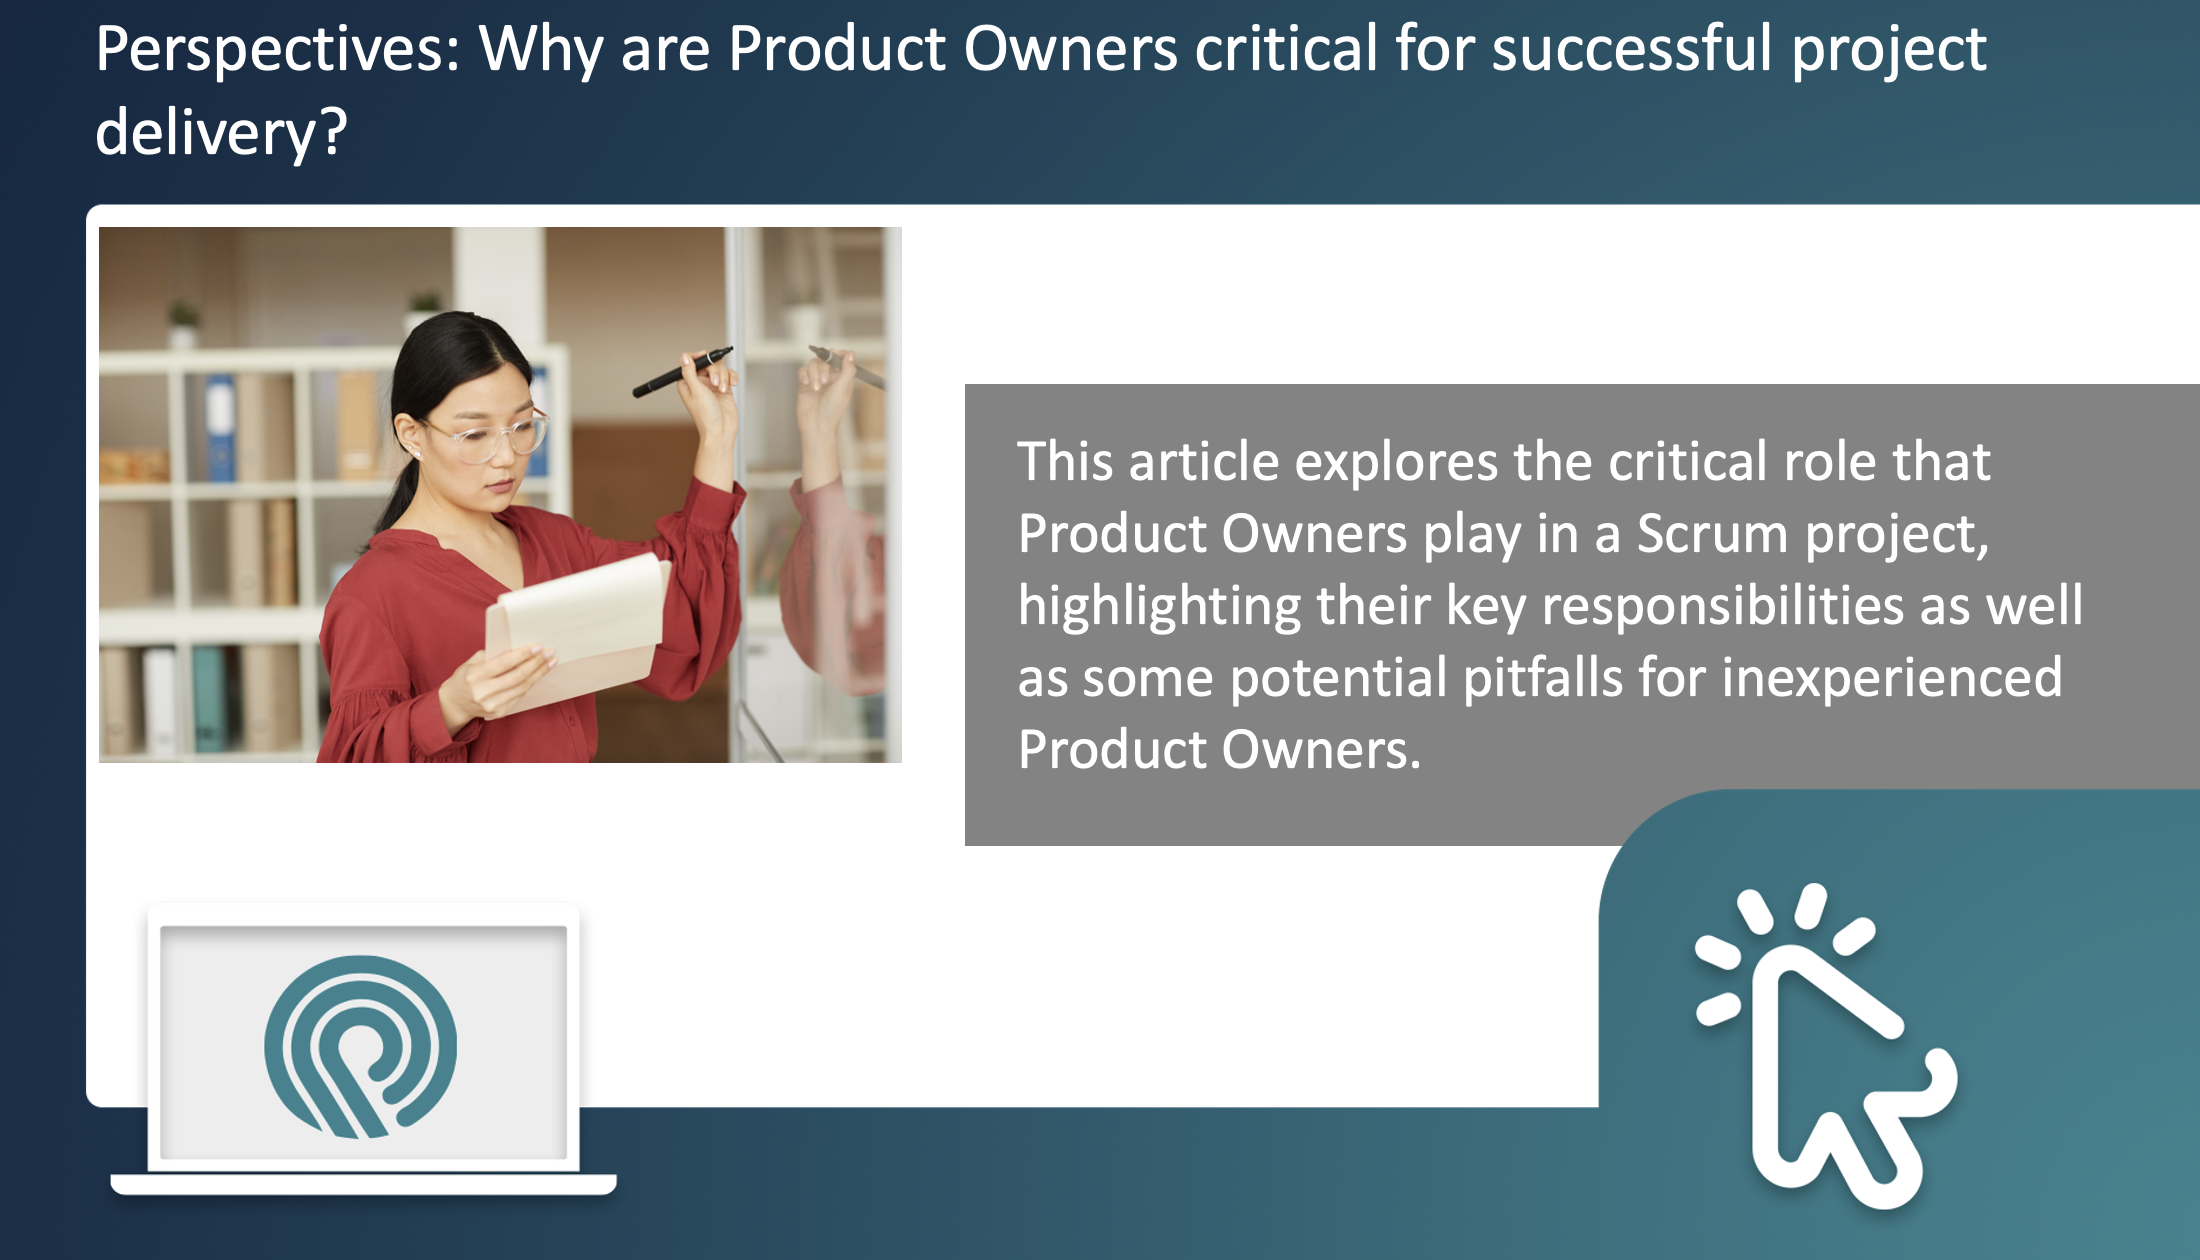 Why are Product Owners critical for successful project delivery?